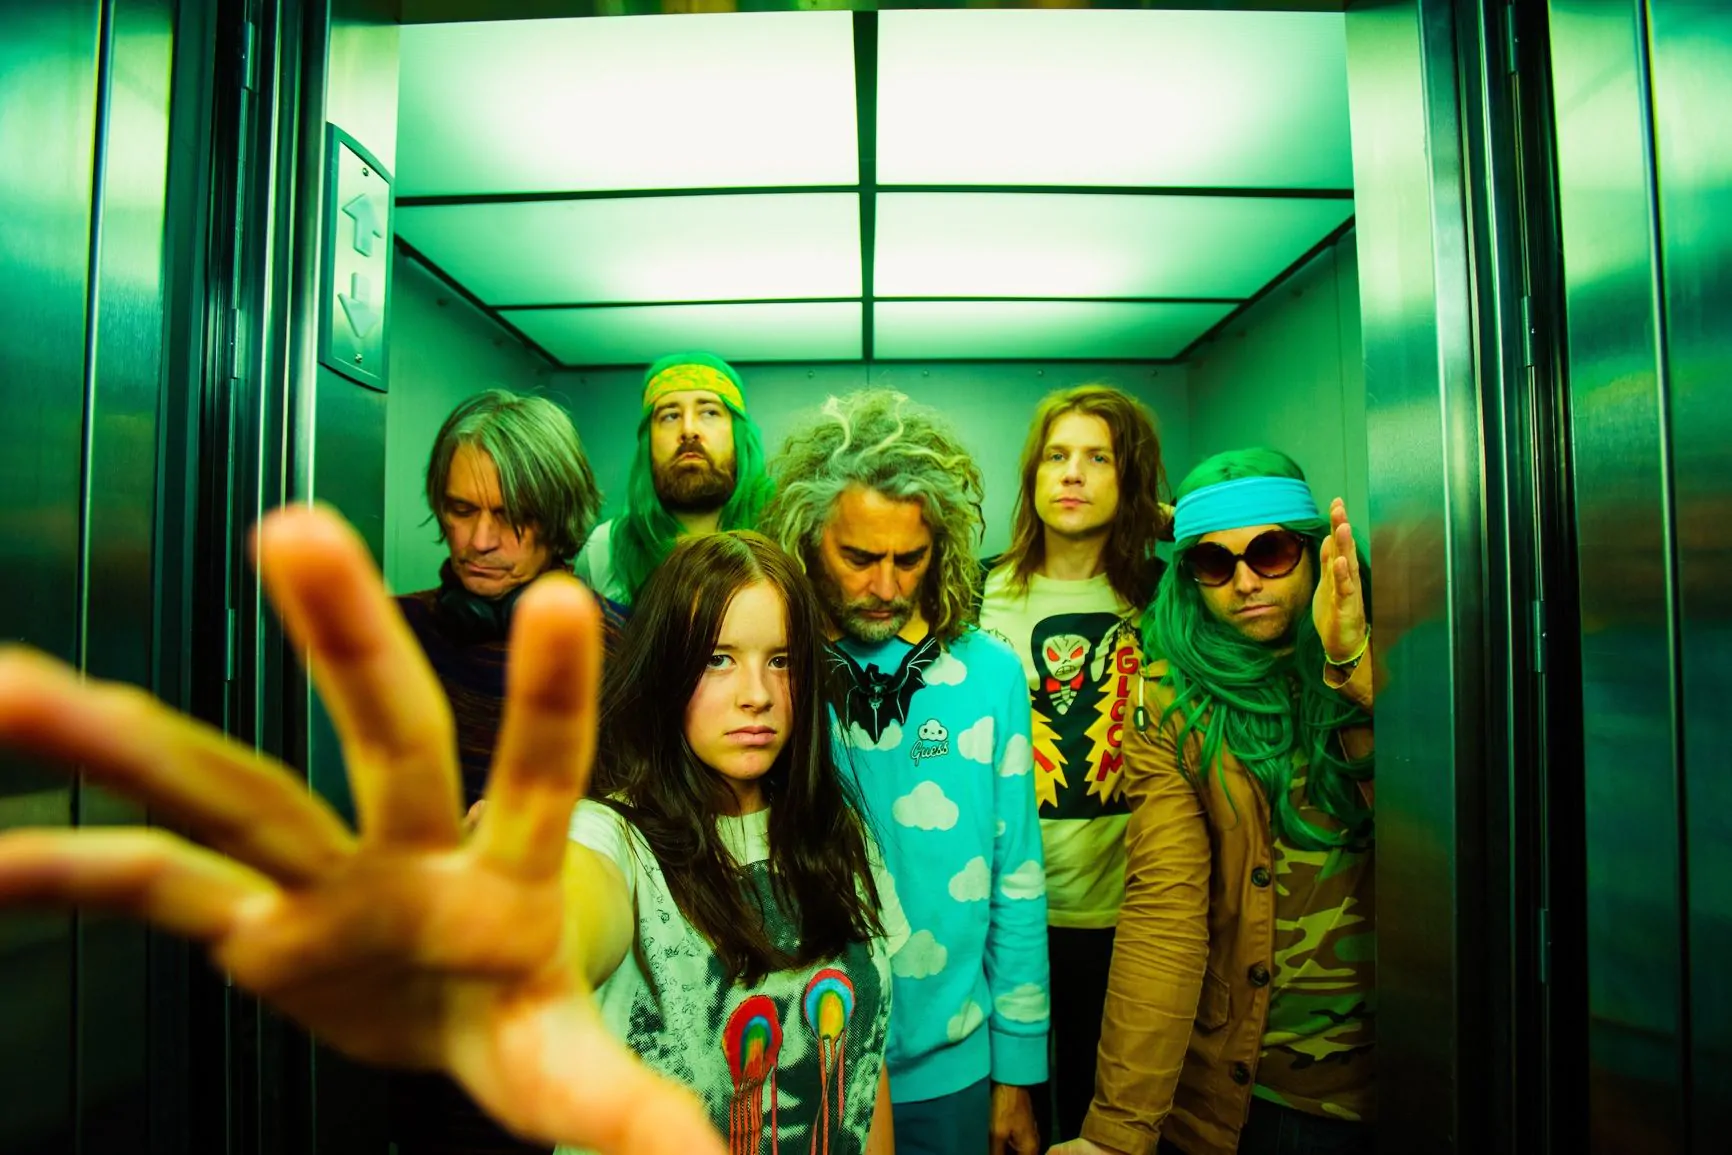 Nell & The Flaming Lips debut video for “We Know Who You Are”